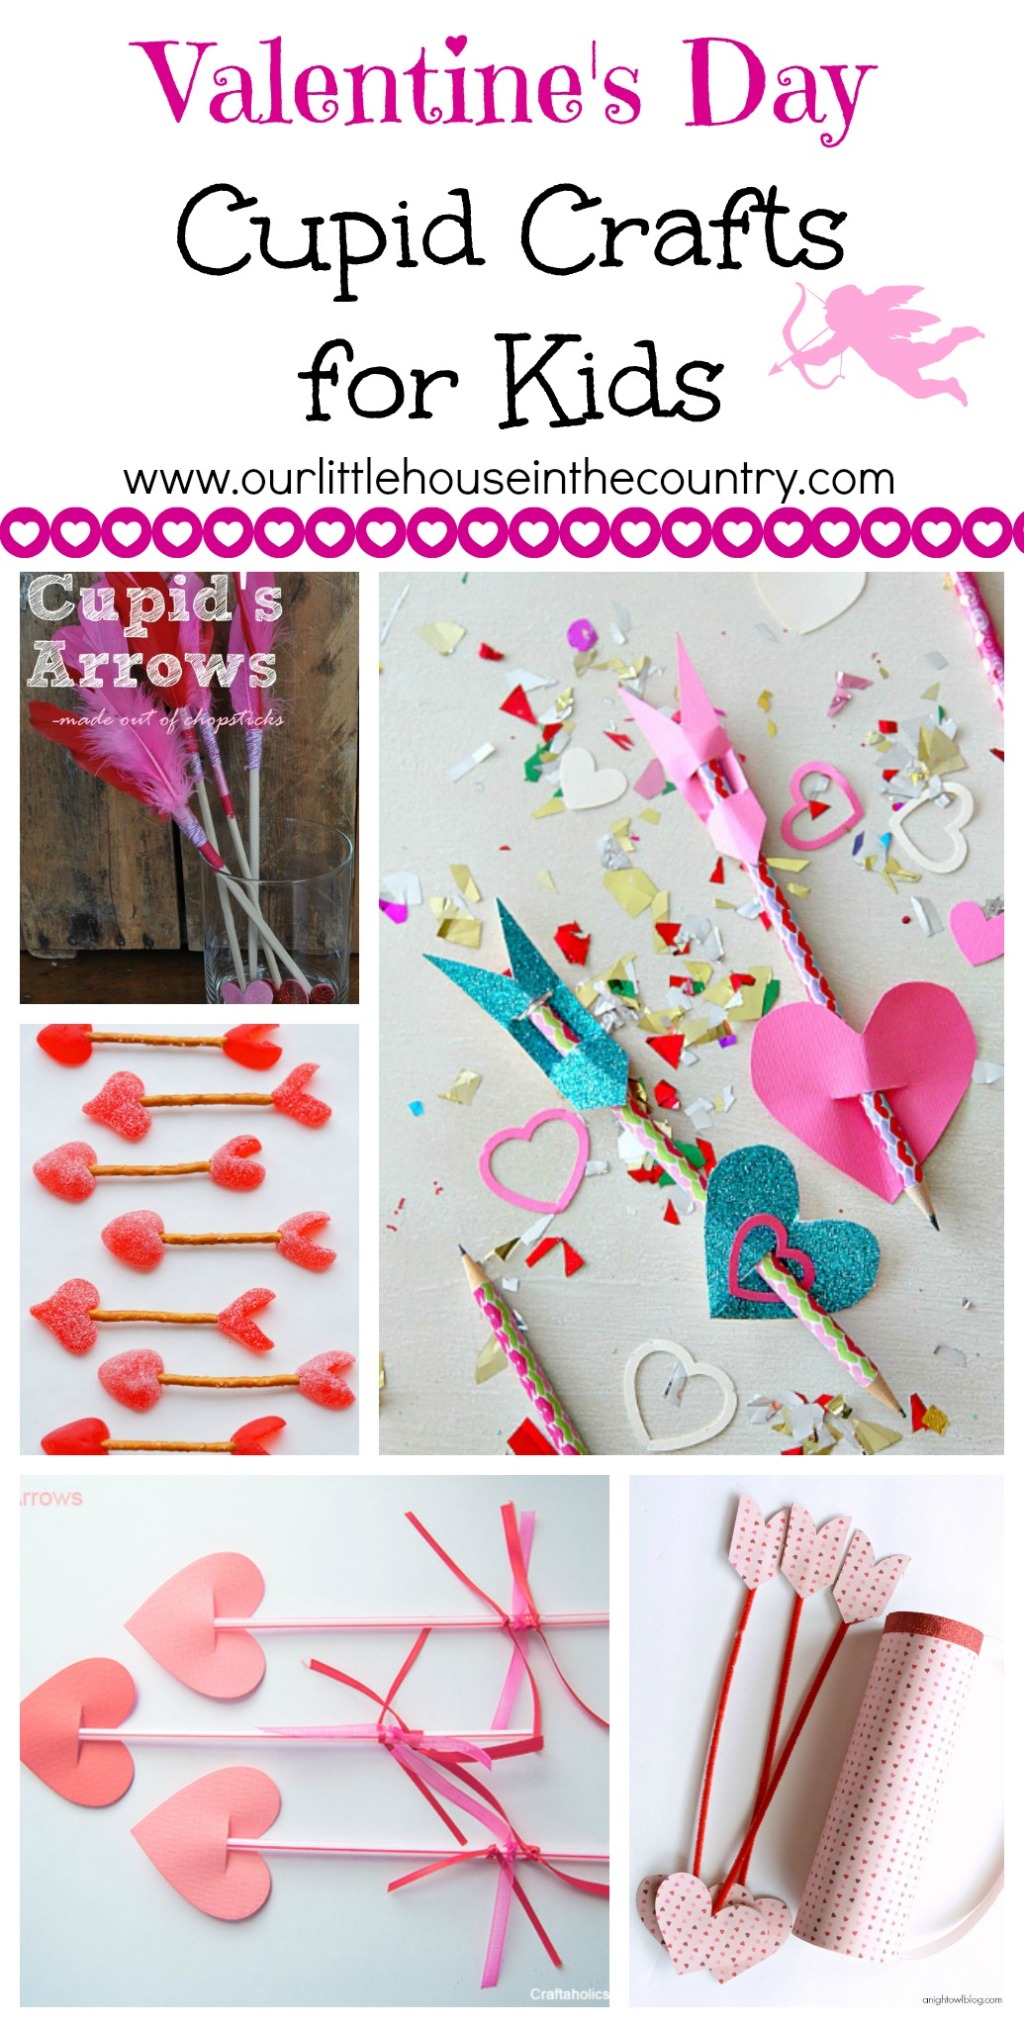 Valentine's Day Cupid Crafts for Kids - Our Little House in the Country